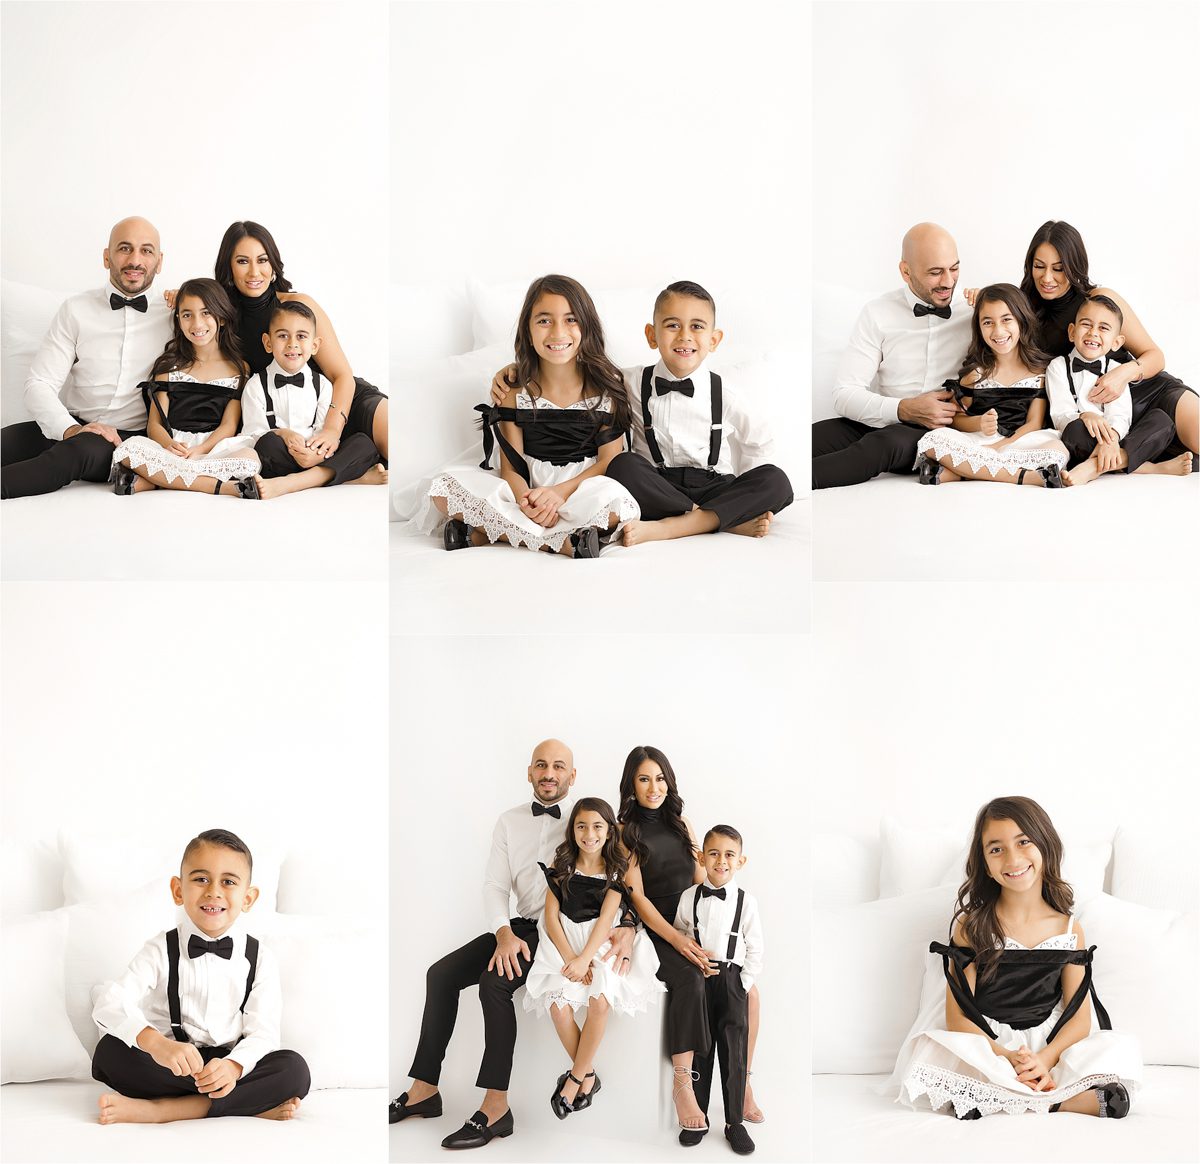 A family dressed in formal black and white attire posing together in various combinations on a white backdrop.